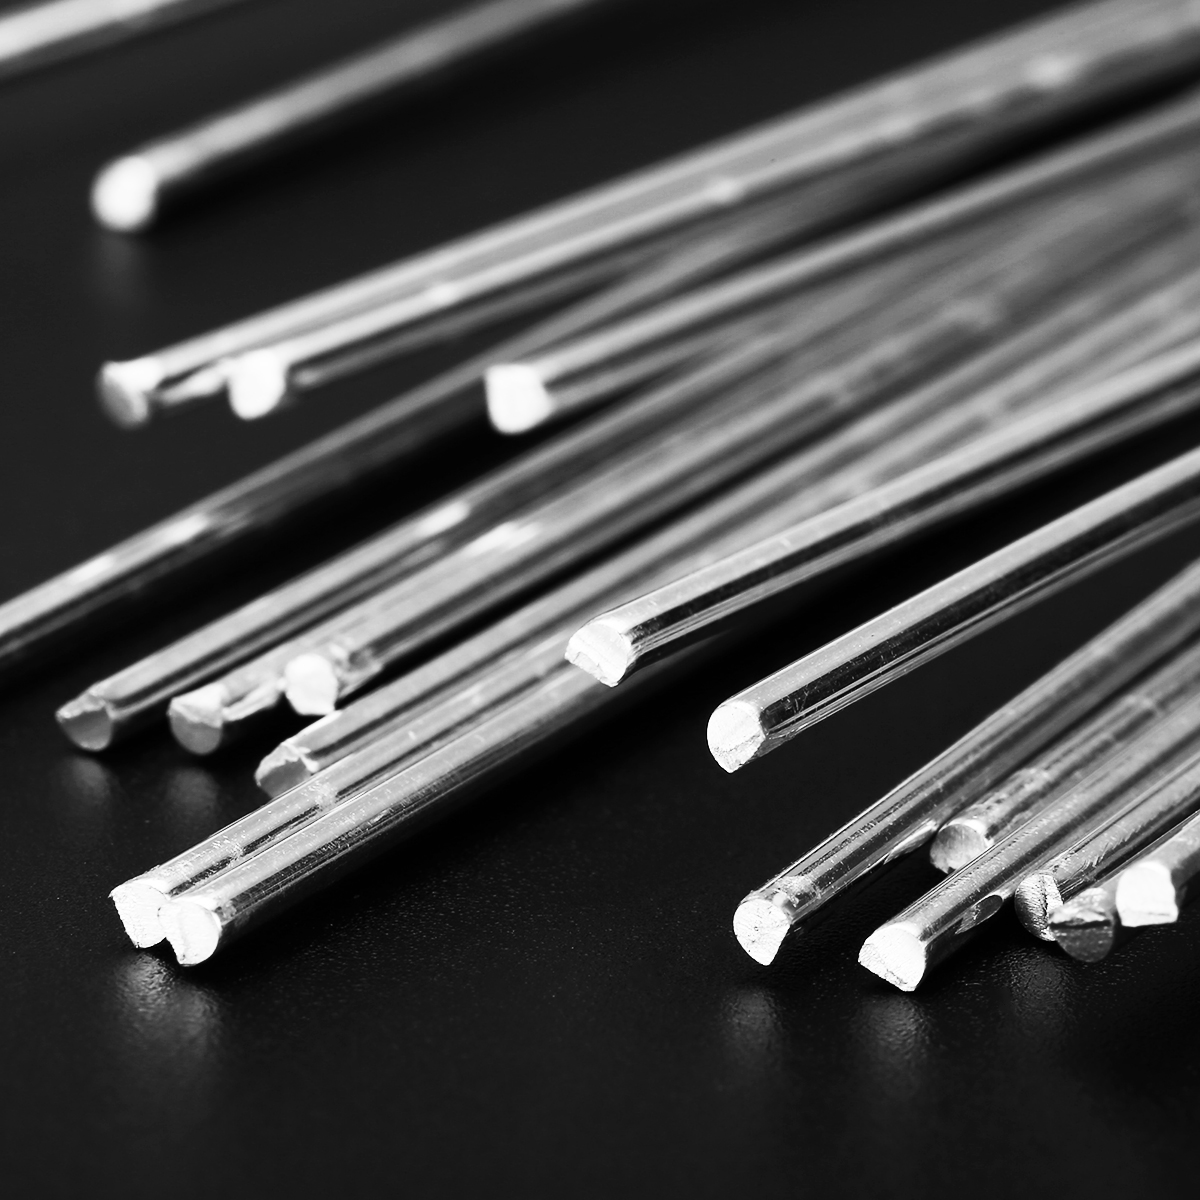 20pcs 2mm*500mm Aluminum Welding Rods Anti-rust Wire Soldering Rod Set for Argon Arc Welding and Filling Material